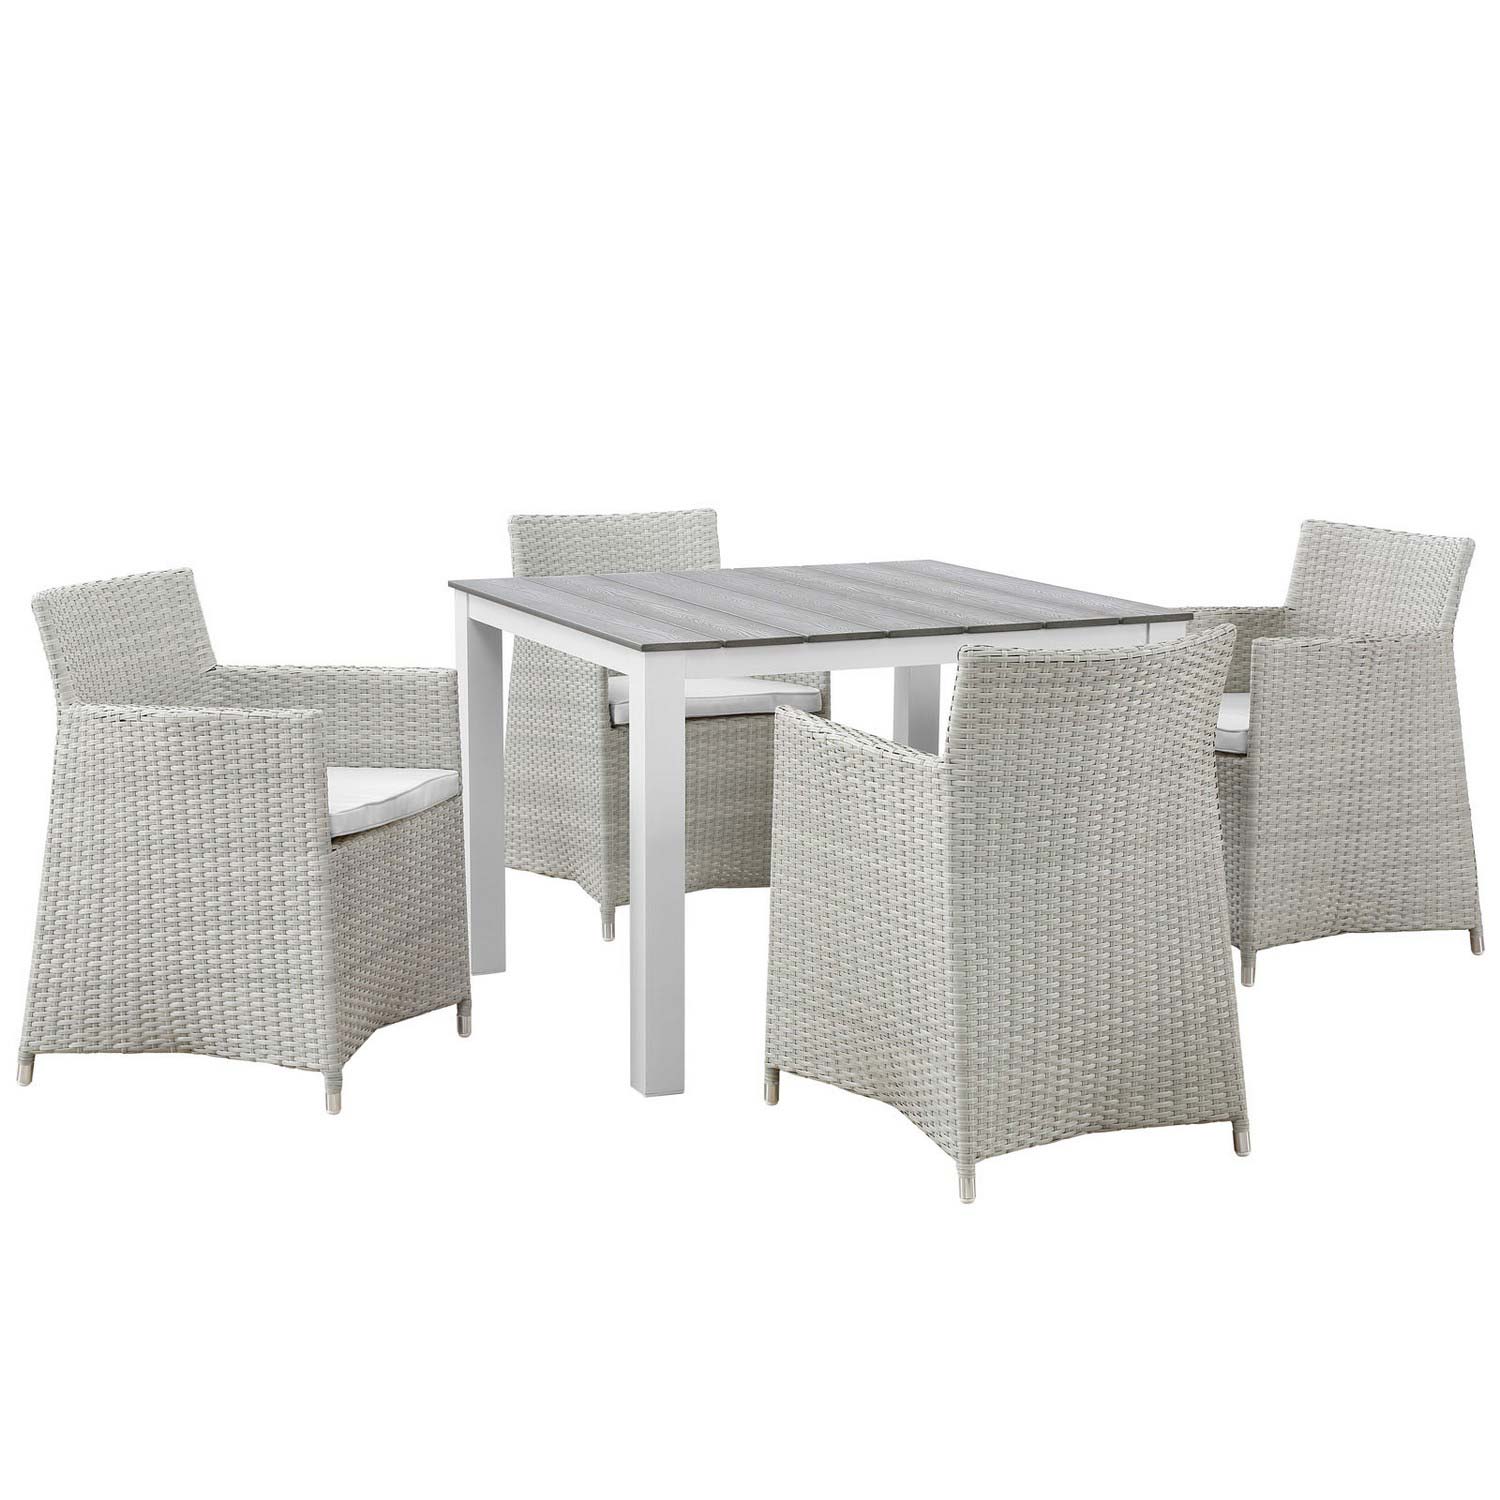 Modway Junction 5 Piece Outdoor Patio Dining Set - Gray/White